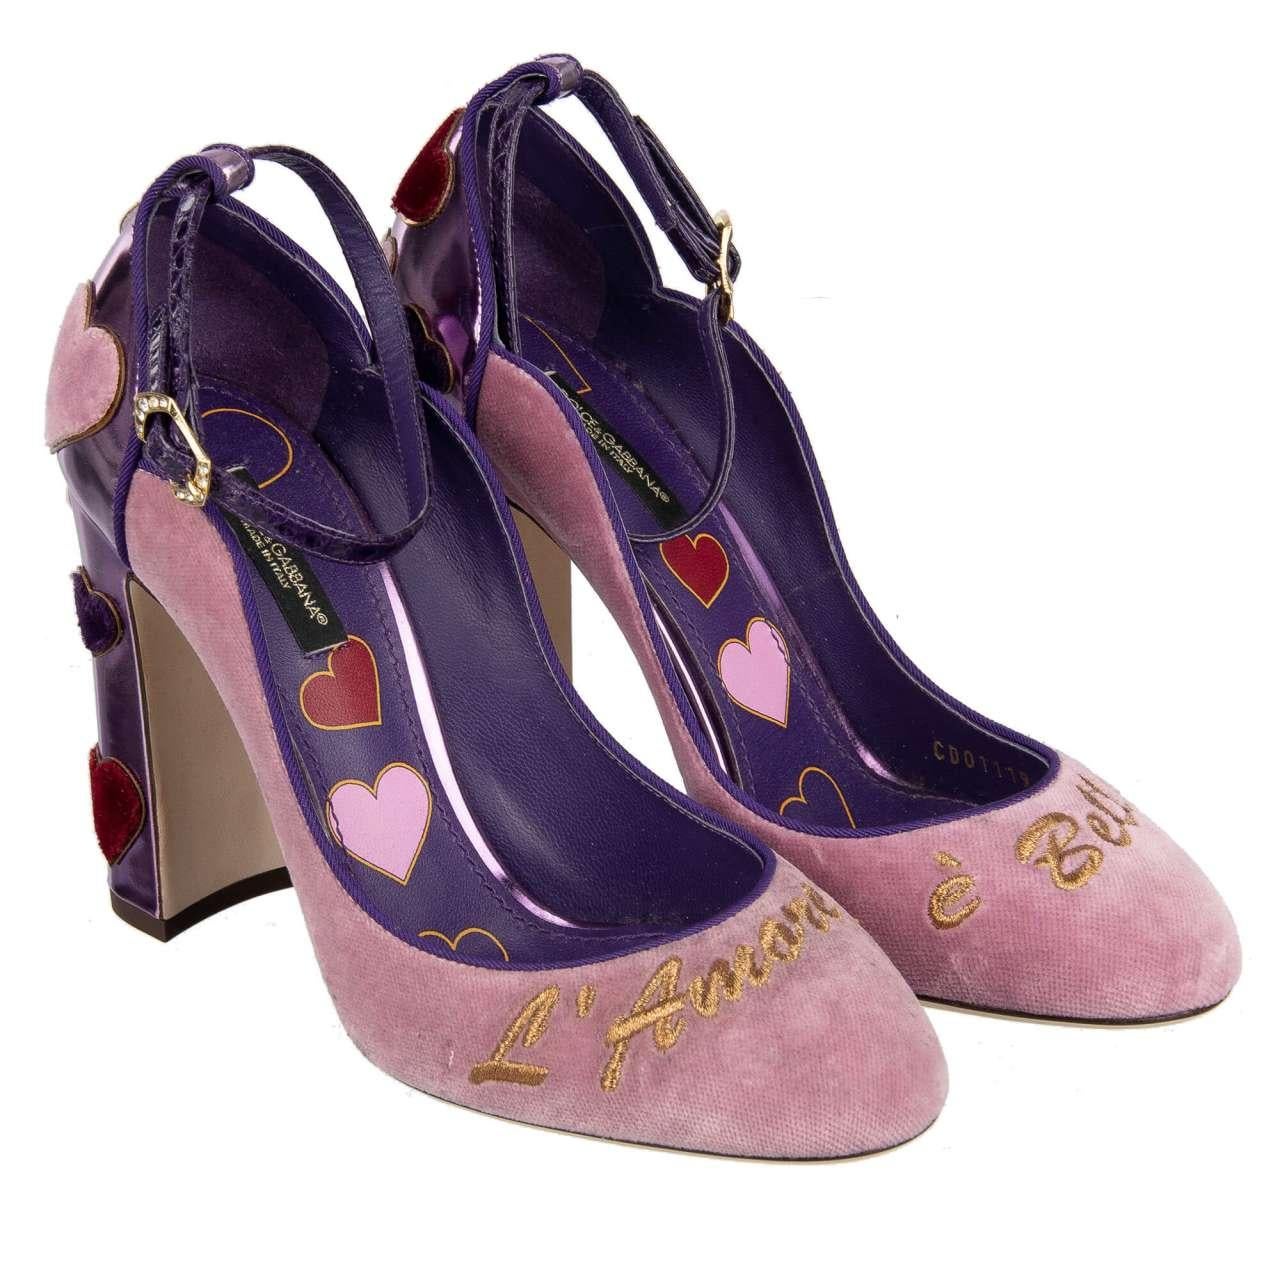 - Velvet Ankle Strap Pumps VALLY in purple and pink with gold embroidered L'Amore, hearts embellished block heel and snakeskin ankle strap by DOLCE & GABBANA - New with Box - MADE IN ITALY - Former RRP: EUR 845 - Gold Embroidered 